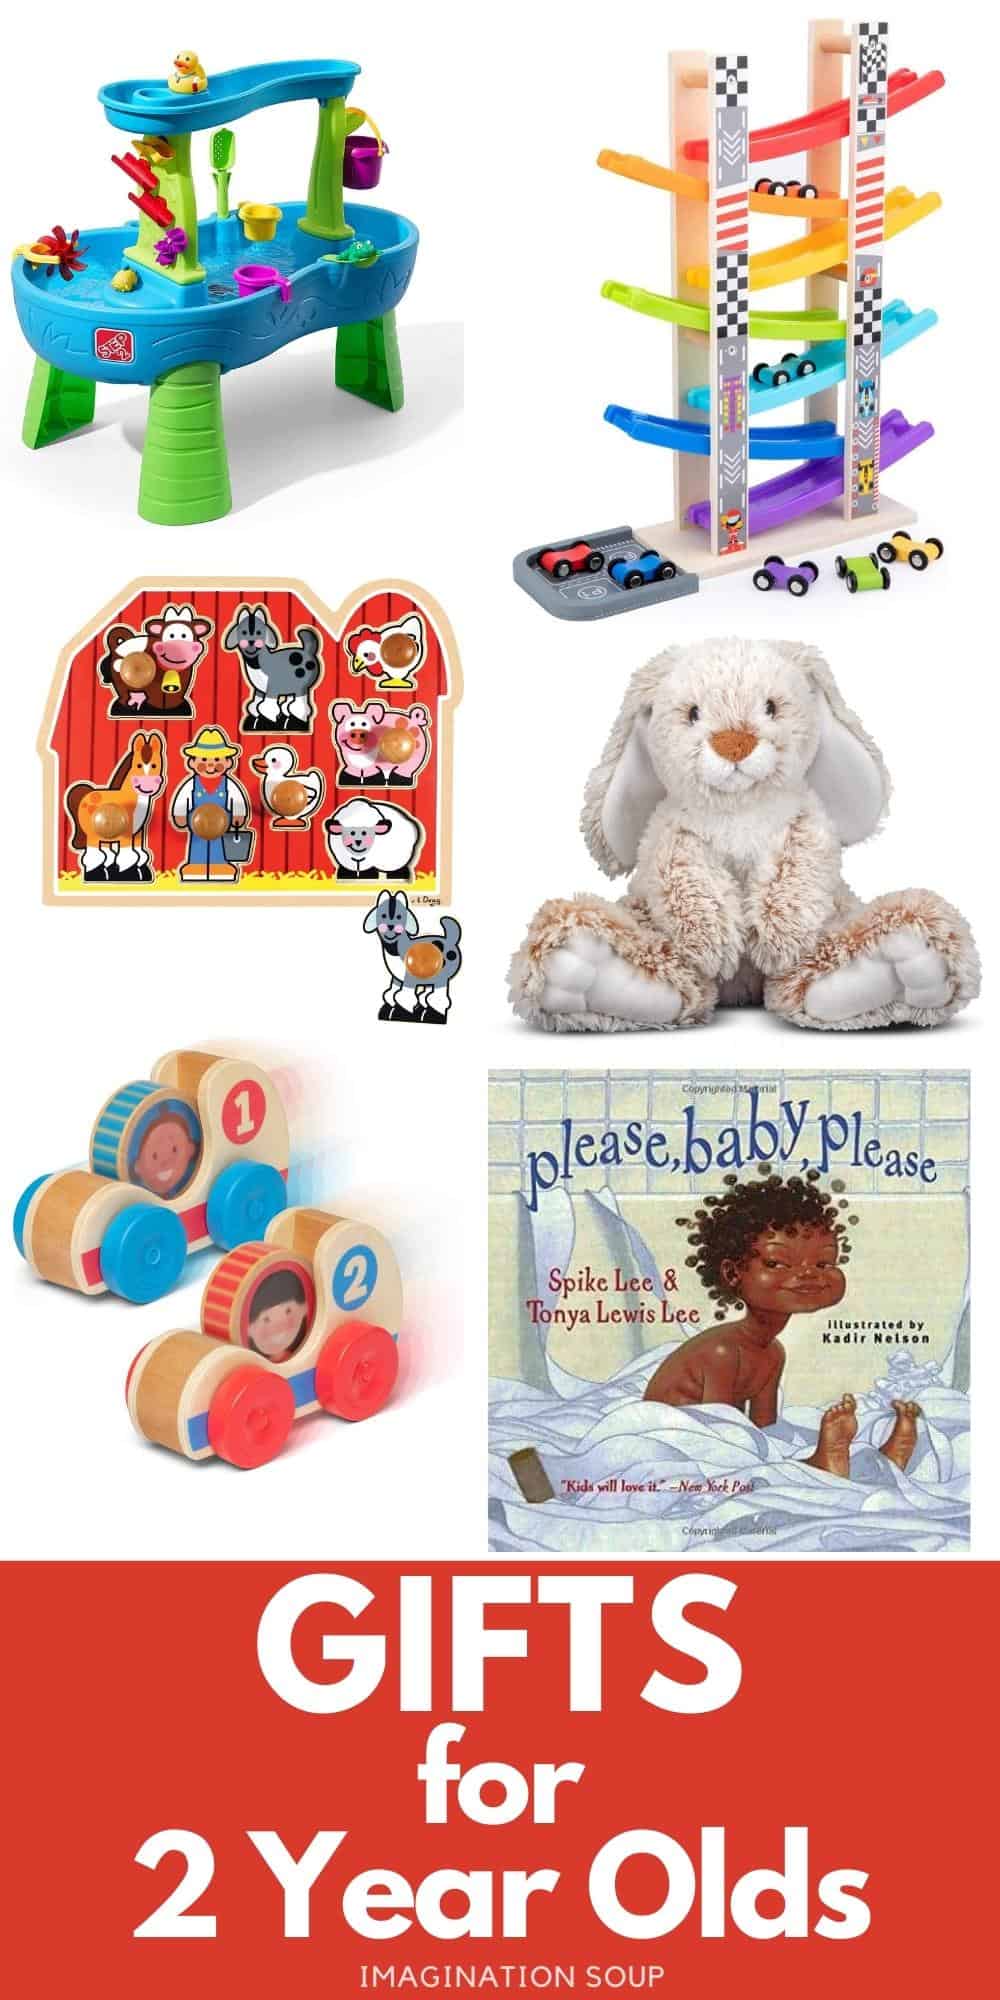 toys, books and other gift ideas for 2 year olds